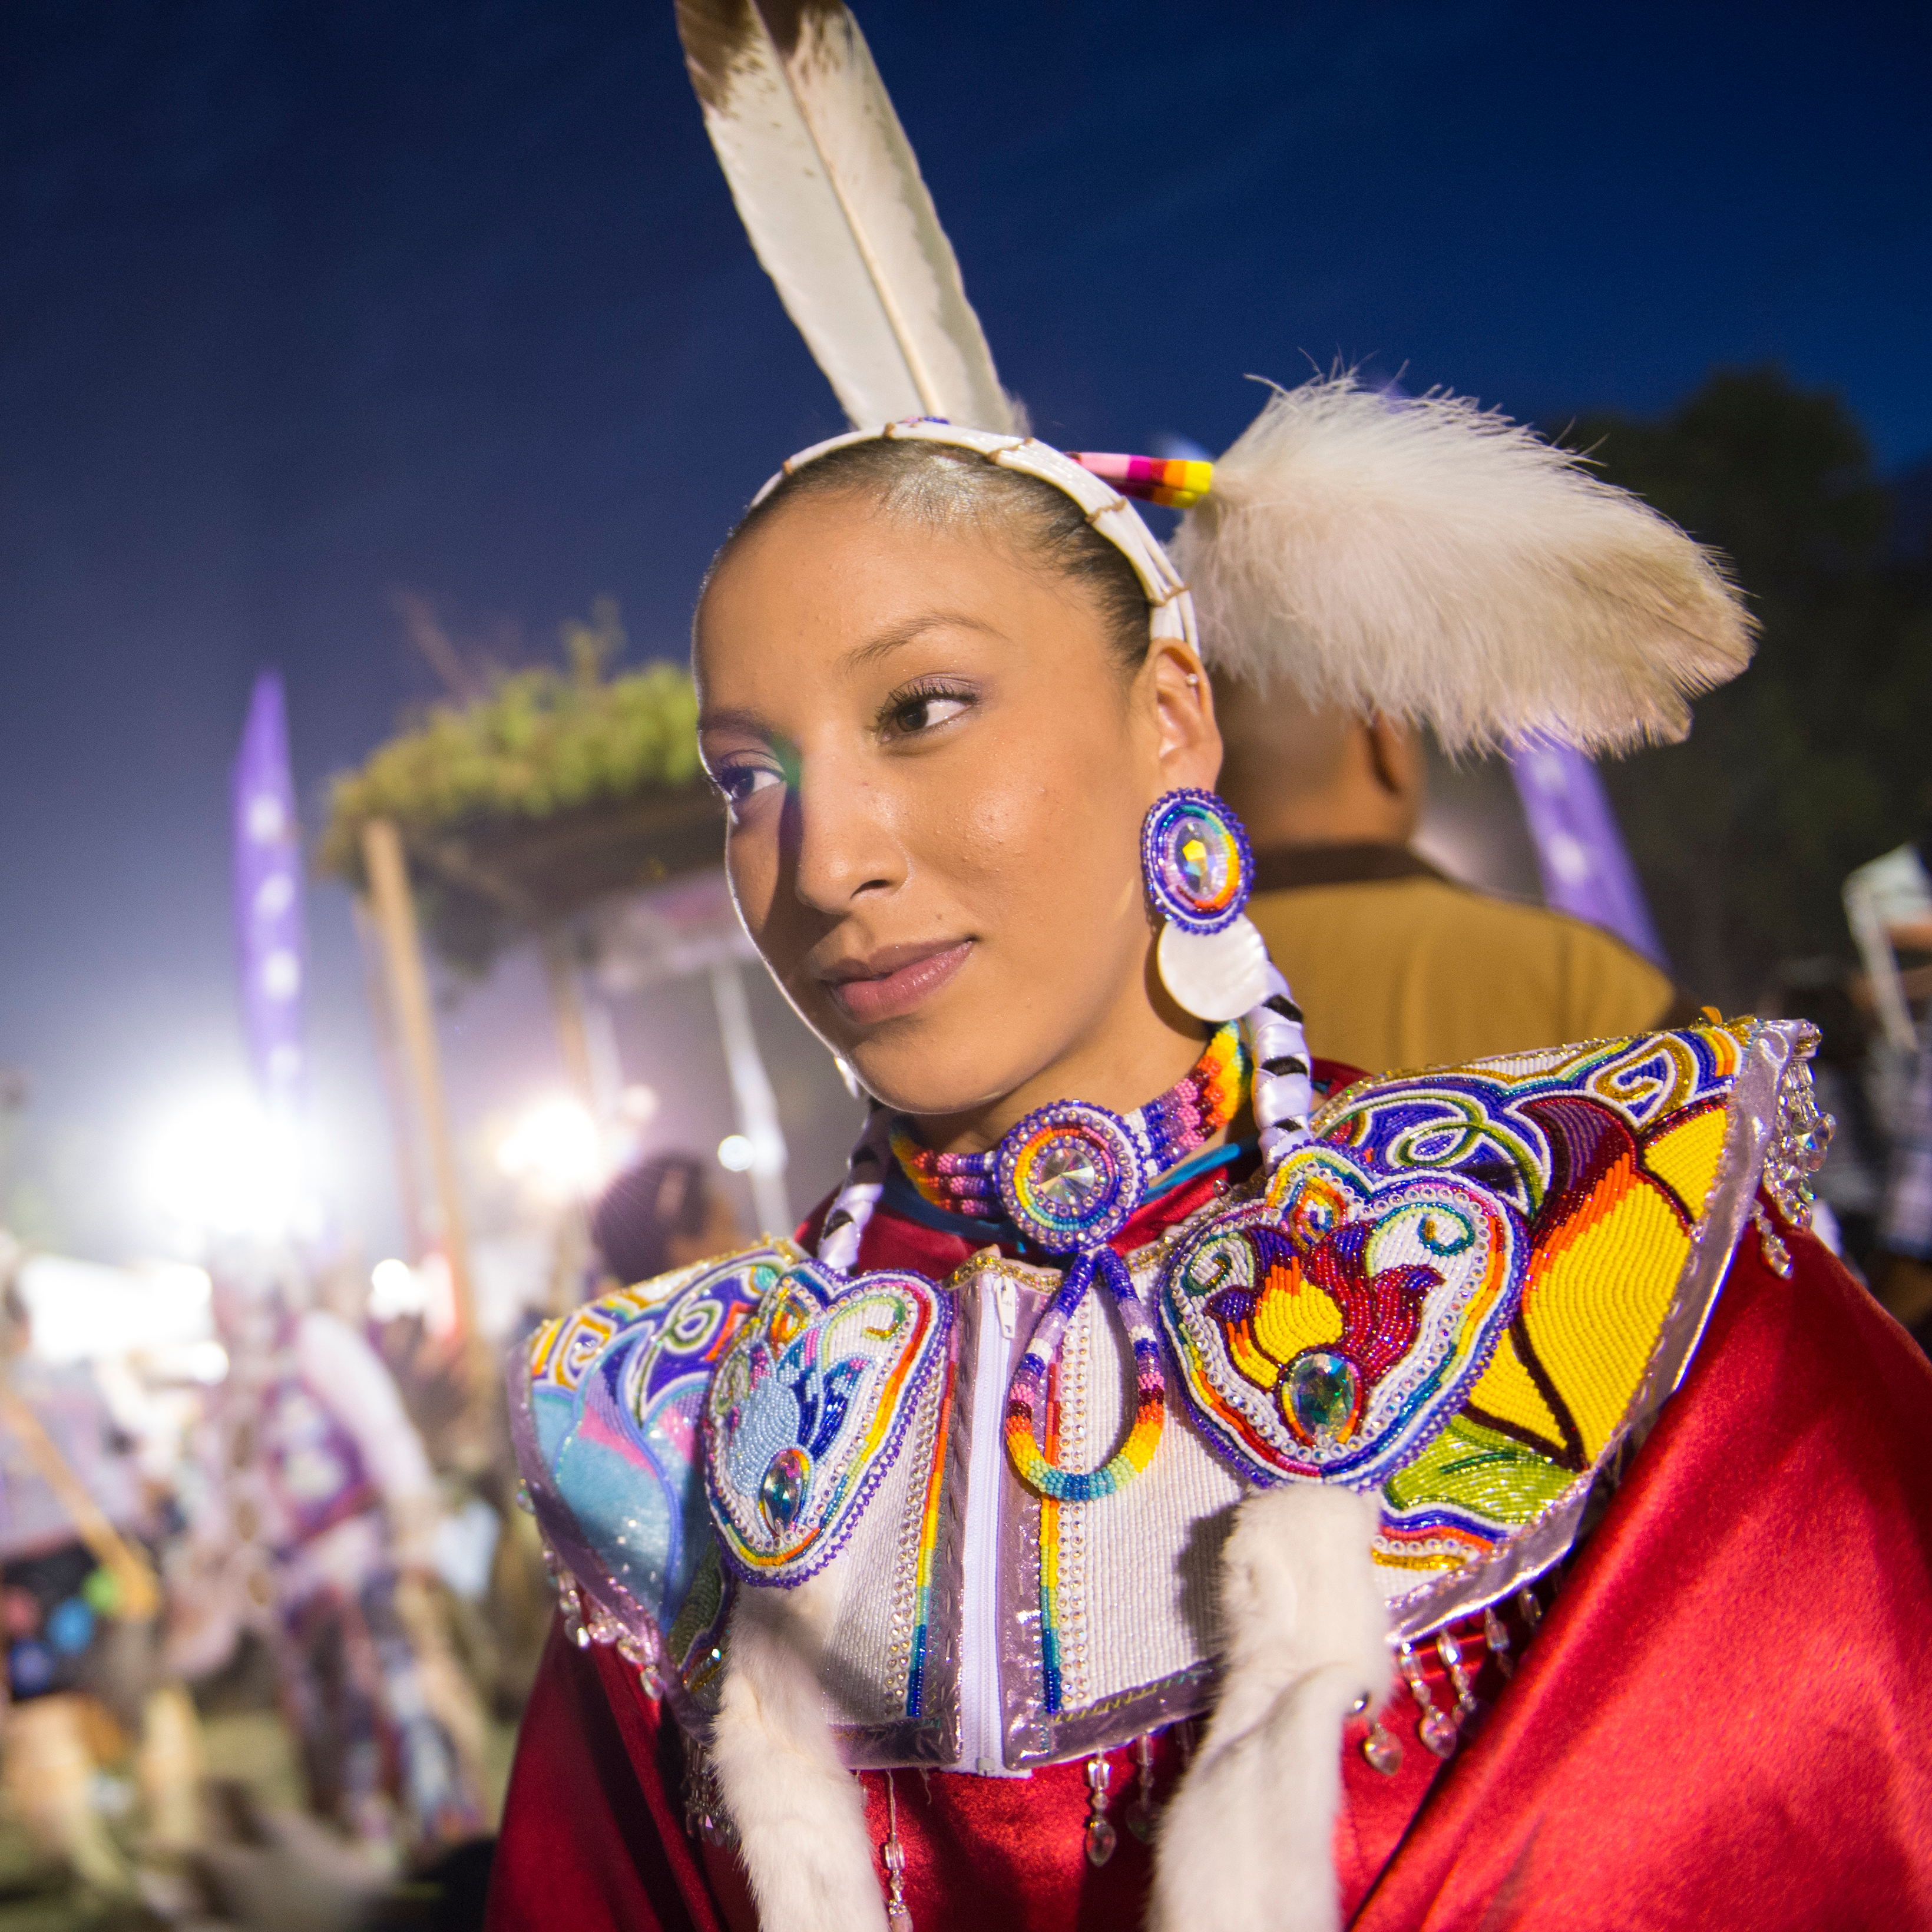 A woman dressed in red and rainbow regalia with many beaded floral pieces and beaded collar, stands proud in the foreground of a croud blurry behind her. She has a long beaded headband with feathers on her head, her hair braided tightly with two wrapped braids down her front. 